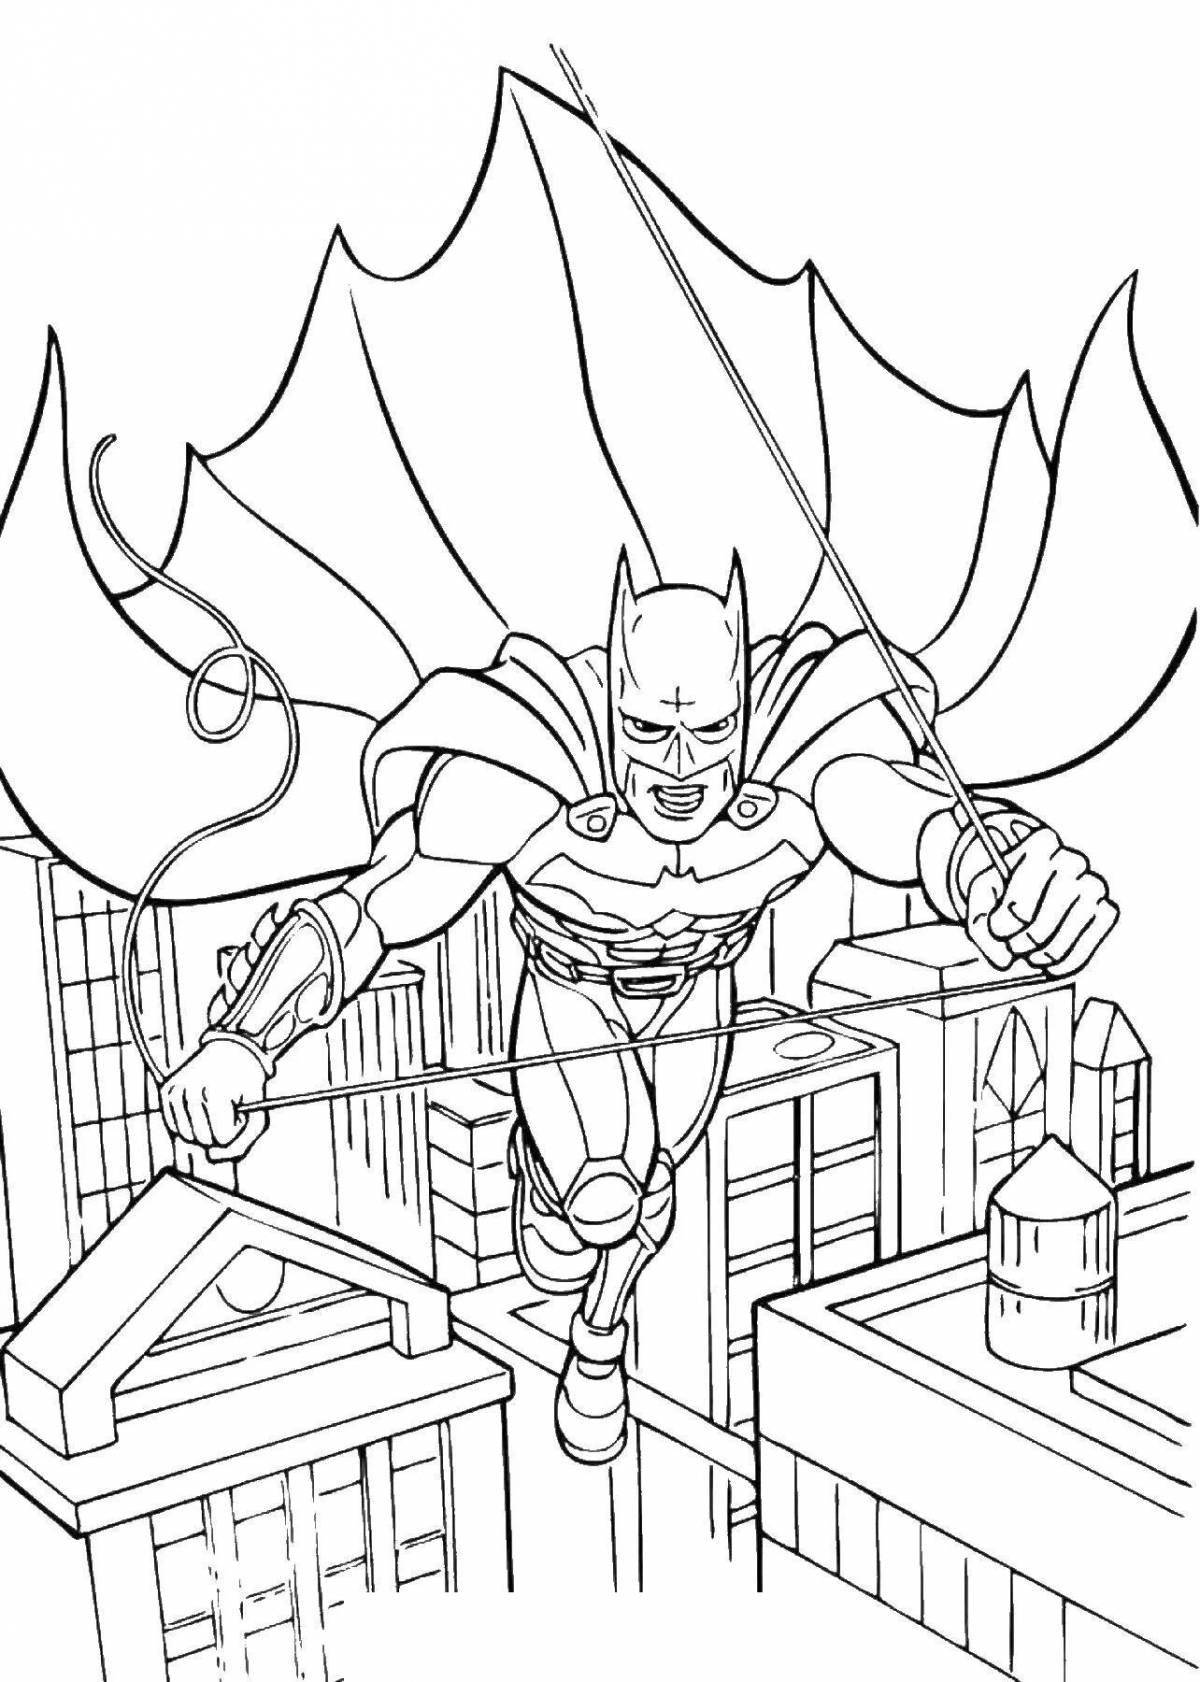 Bright superheroes coloring pages for kids 6-7 years old